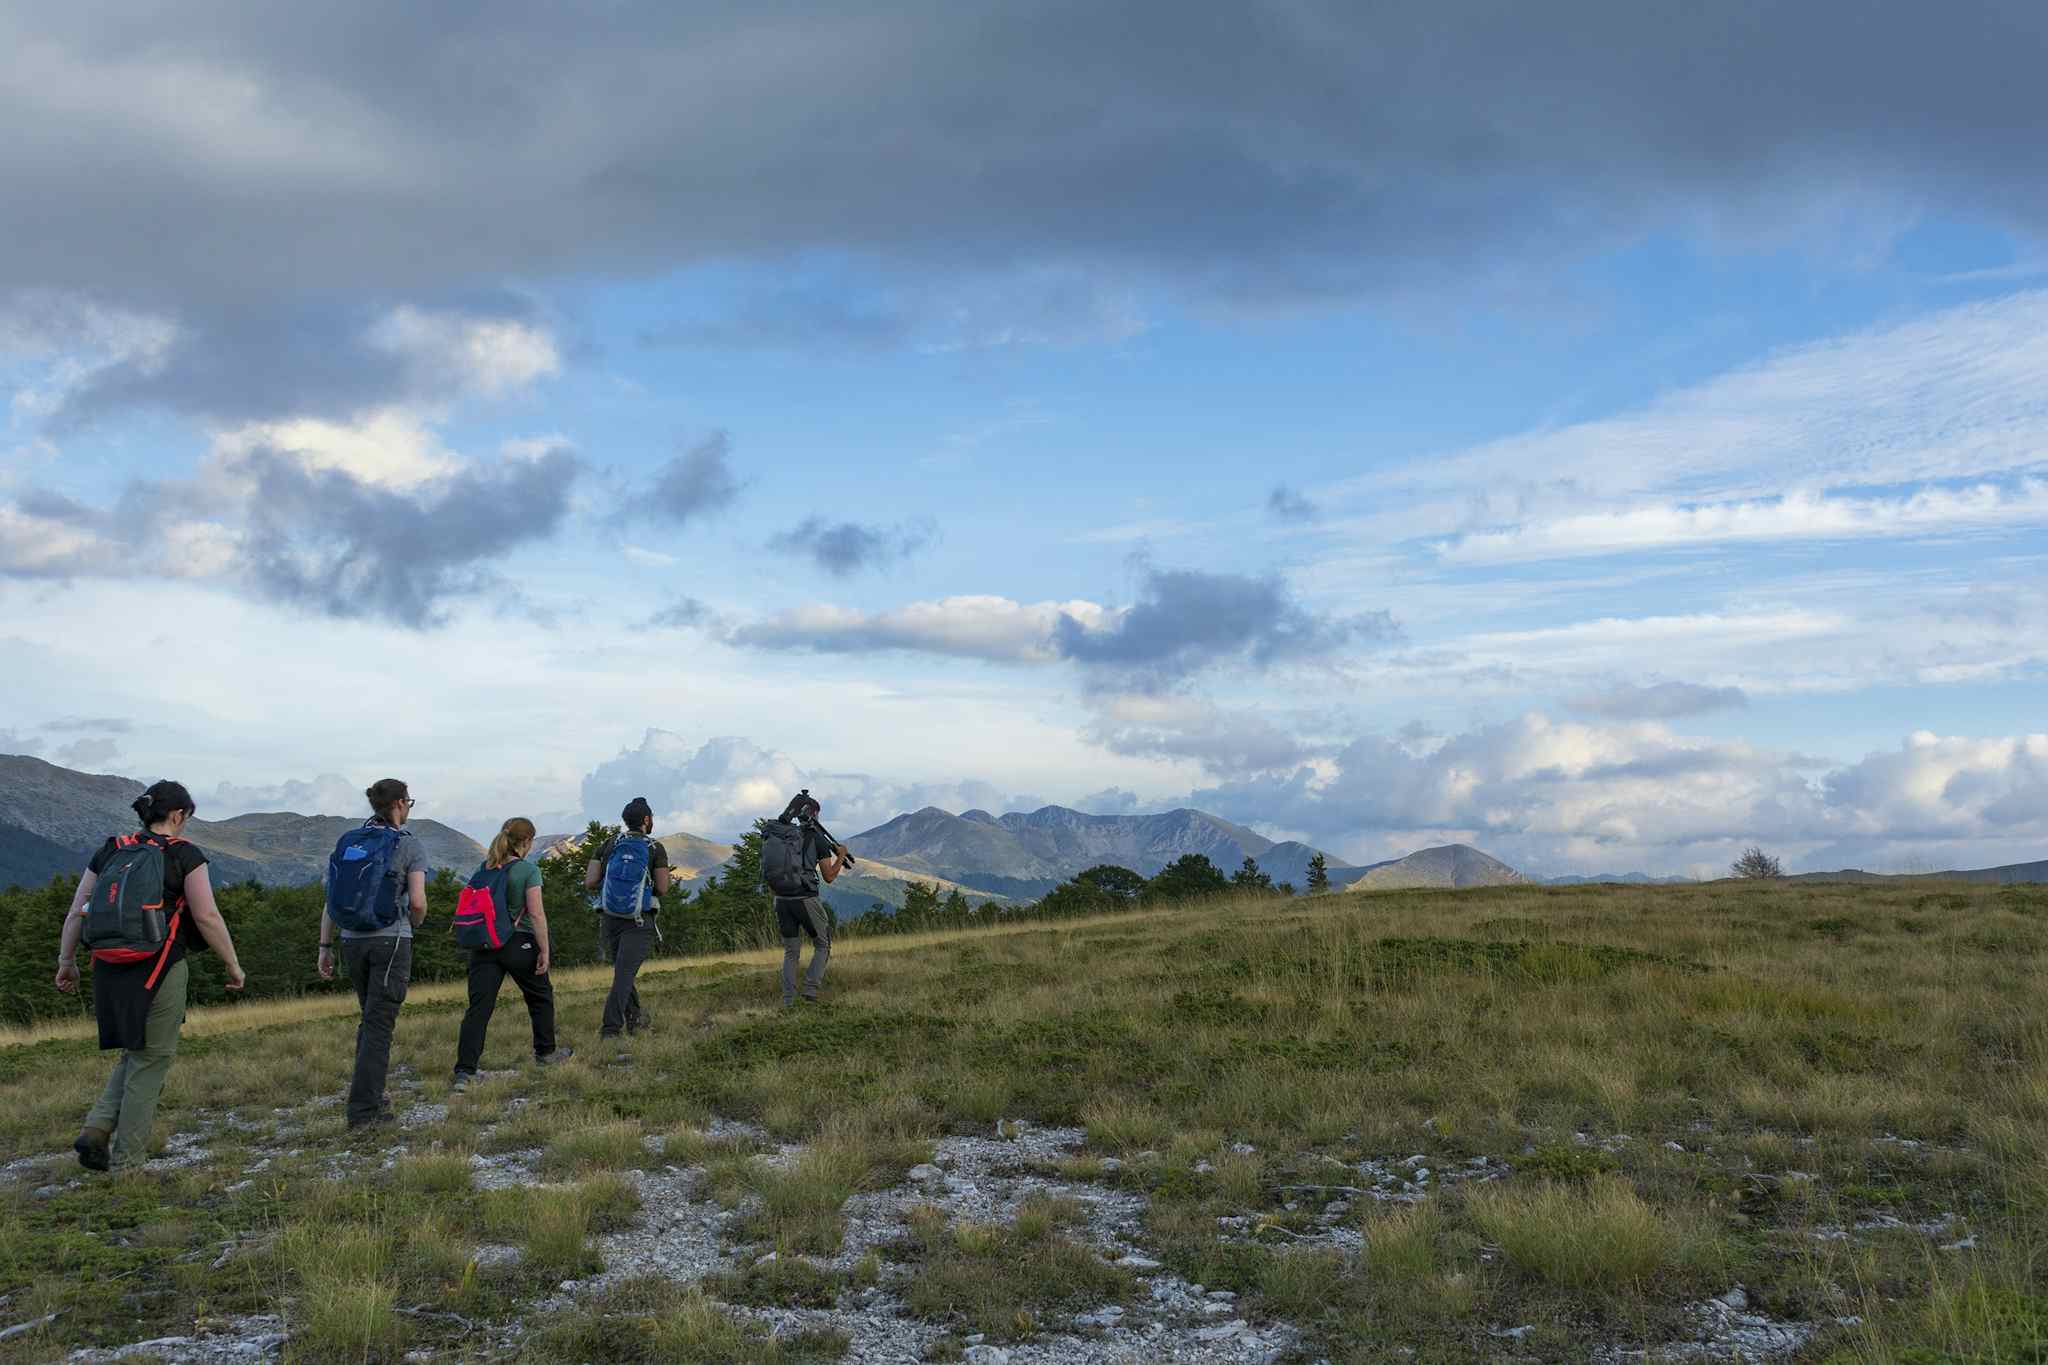 Hiking into the wilderness, Central Apennines, Italy. Photo: Host/Wildlife Adventures